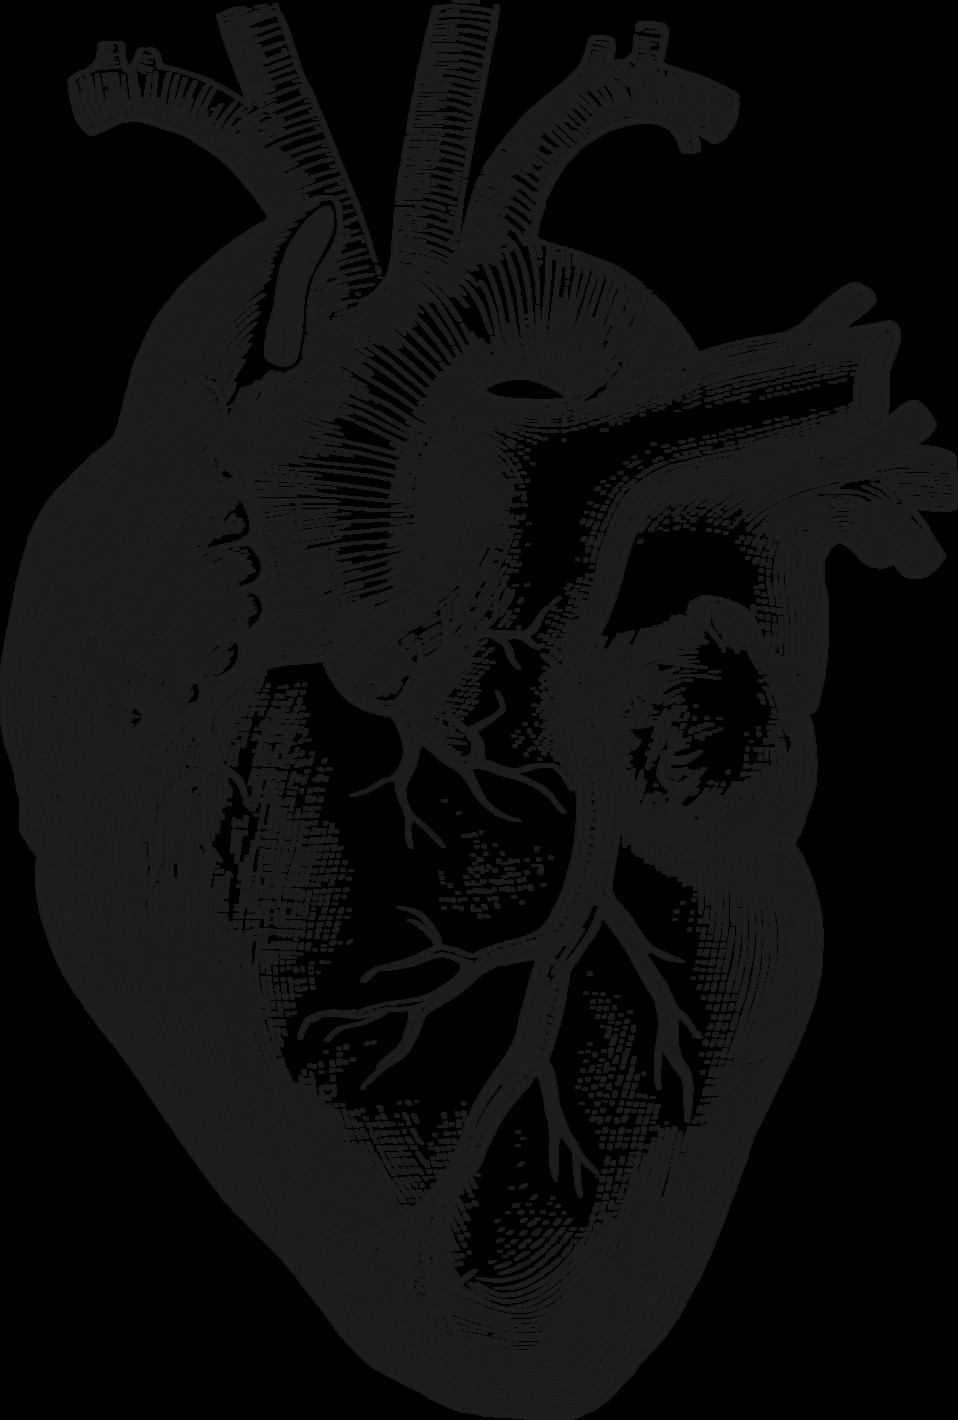 Drawing A Heart On Illustrator Anatomical Heart Art Anatomical Heart Heart Anatomical Heart